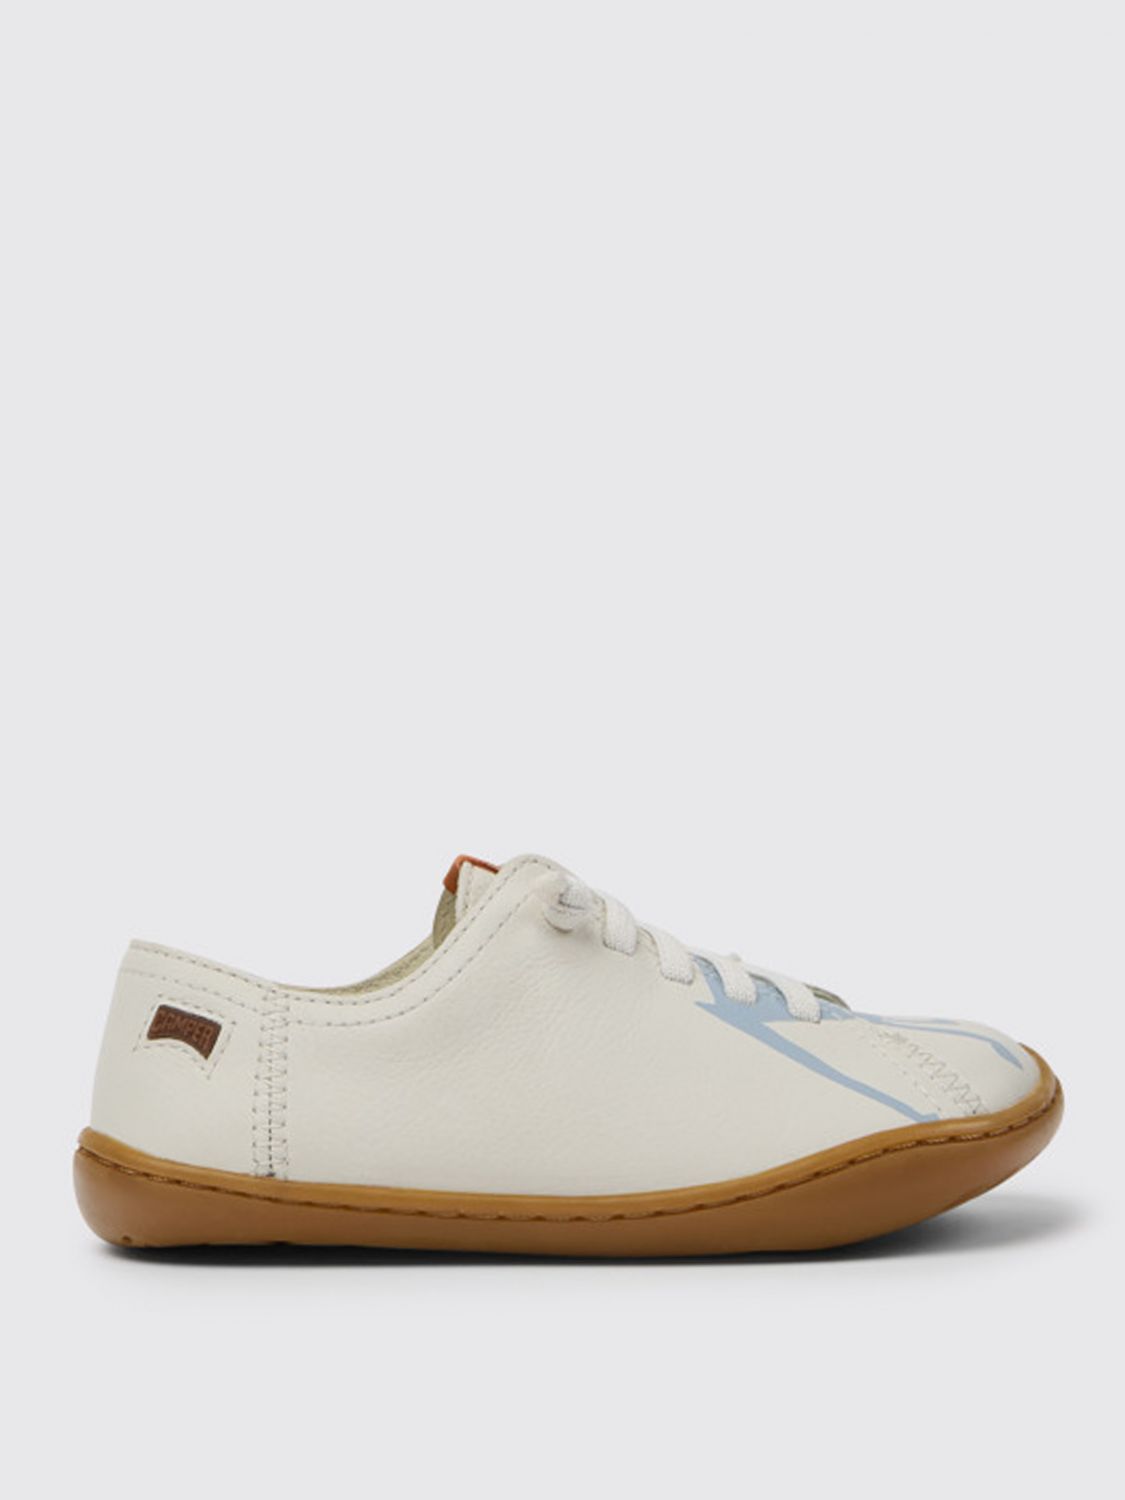 Camper Outlet: shoes in calfskin - White | Camper shoes 80003-128 TWINS online on GIGLIO.COM